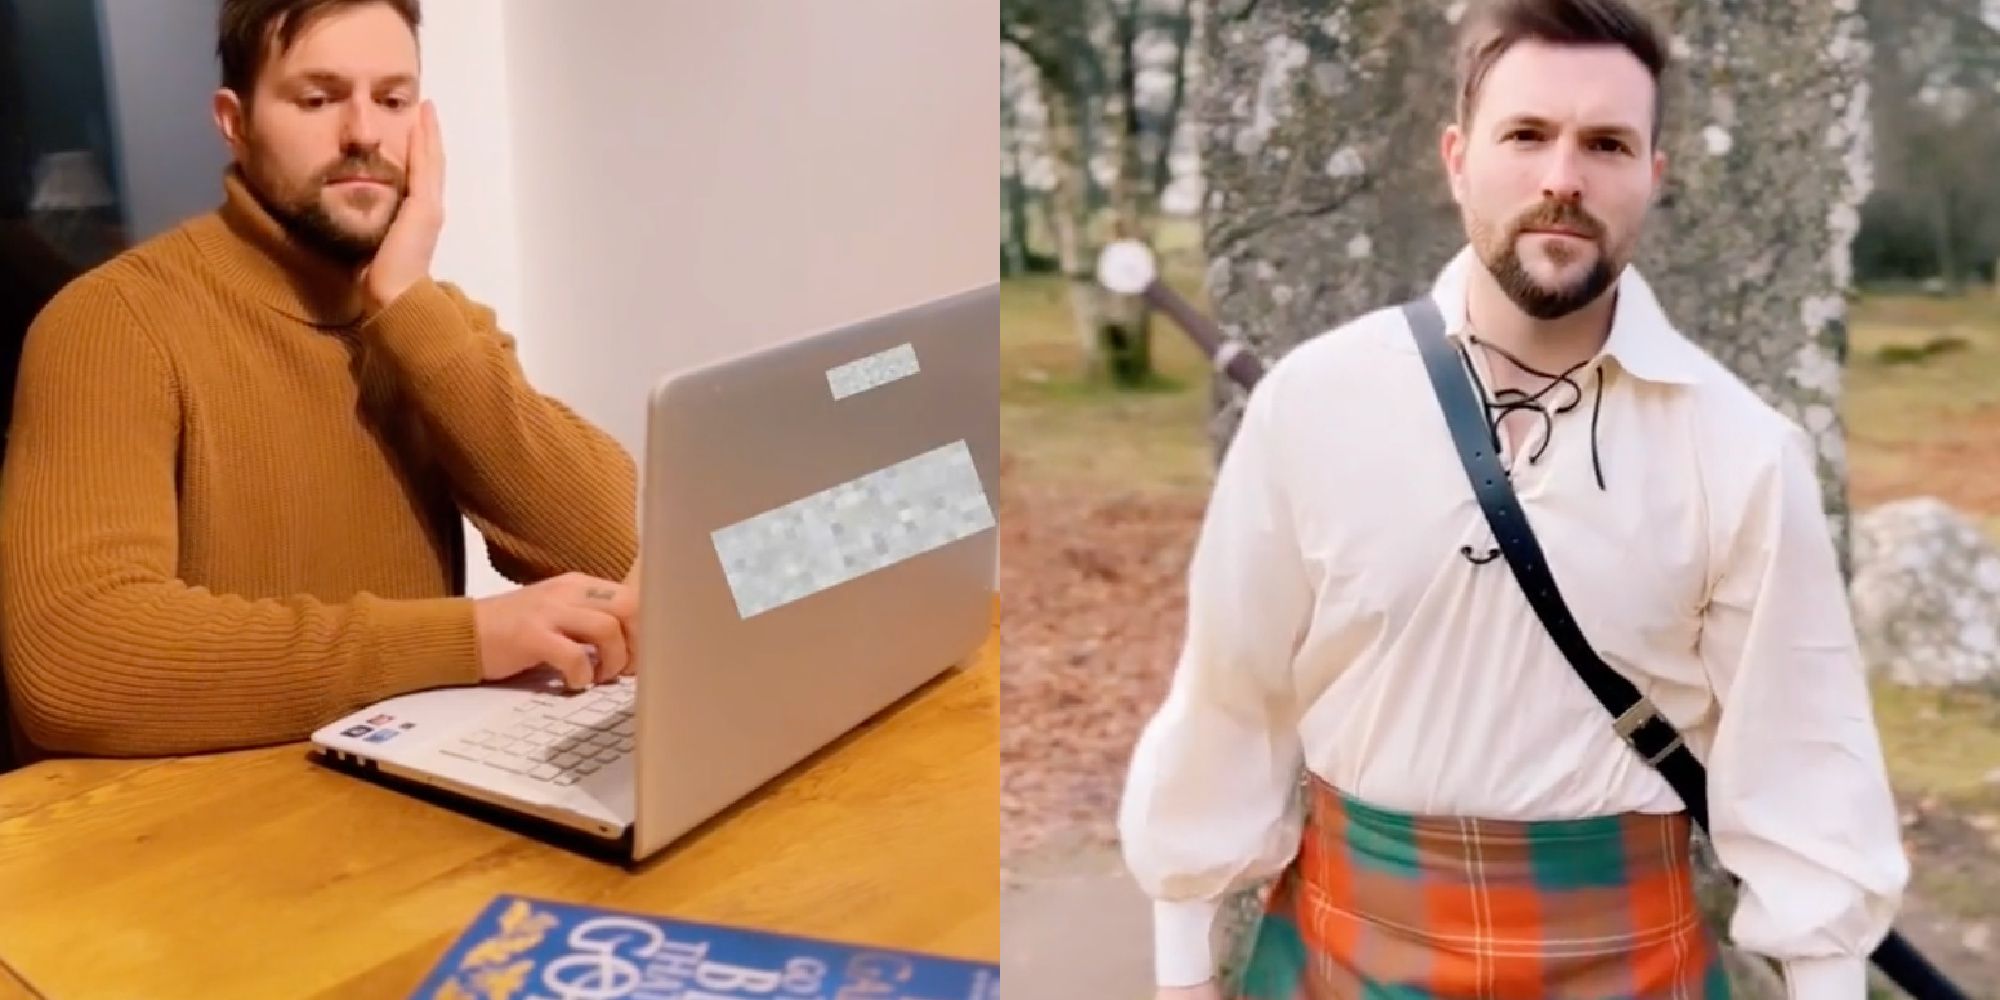 An Outlander fan looking at a book and wearing a kilt on TikTok